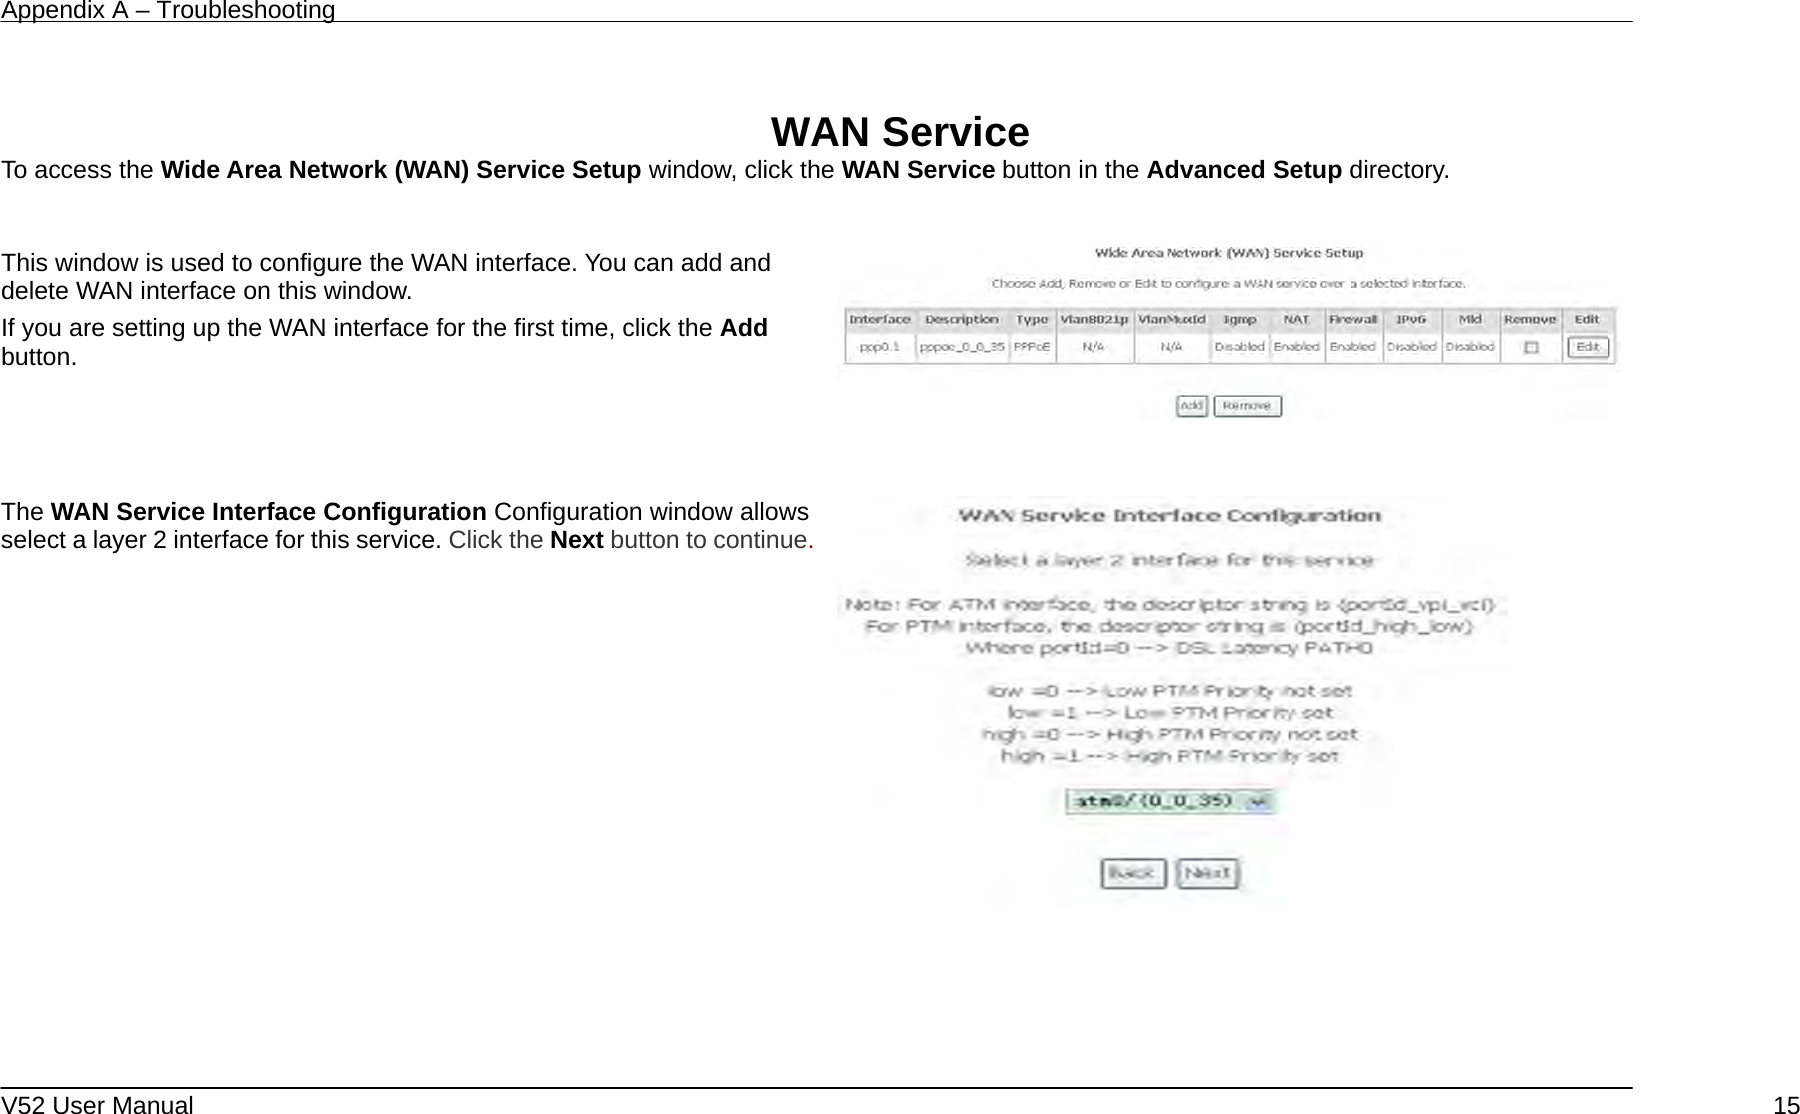 Appendix A – Troubleshooting   V52 User Manual    15 WAN Service To access the Wide Area Network (WAN) Service Setup window, click the WAN Service button in the Advanced Setup directory.  This window is used to configure the WAN interface. You can add and delete WAN interface on this window.   If you are setting up the WAN interface for the first time, click the Add button.      The WAN Service Interface Configuration Configuration window allows select a layer 2 interface for this service. Click the Next button to continue.       